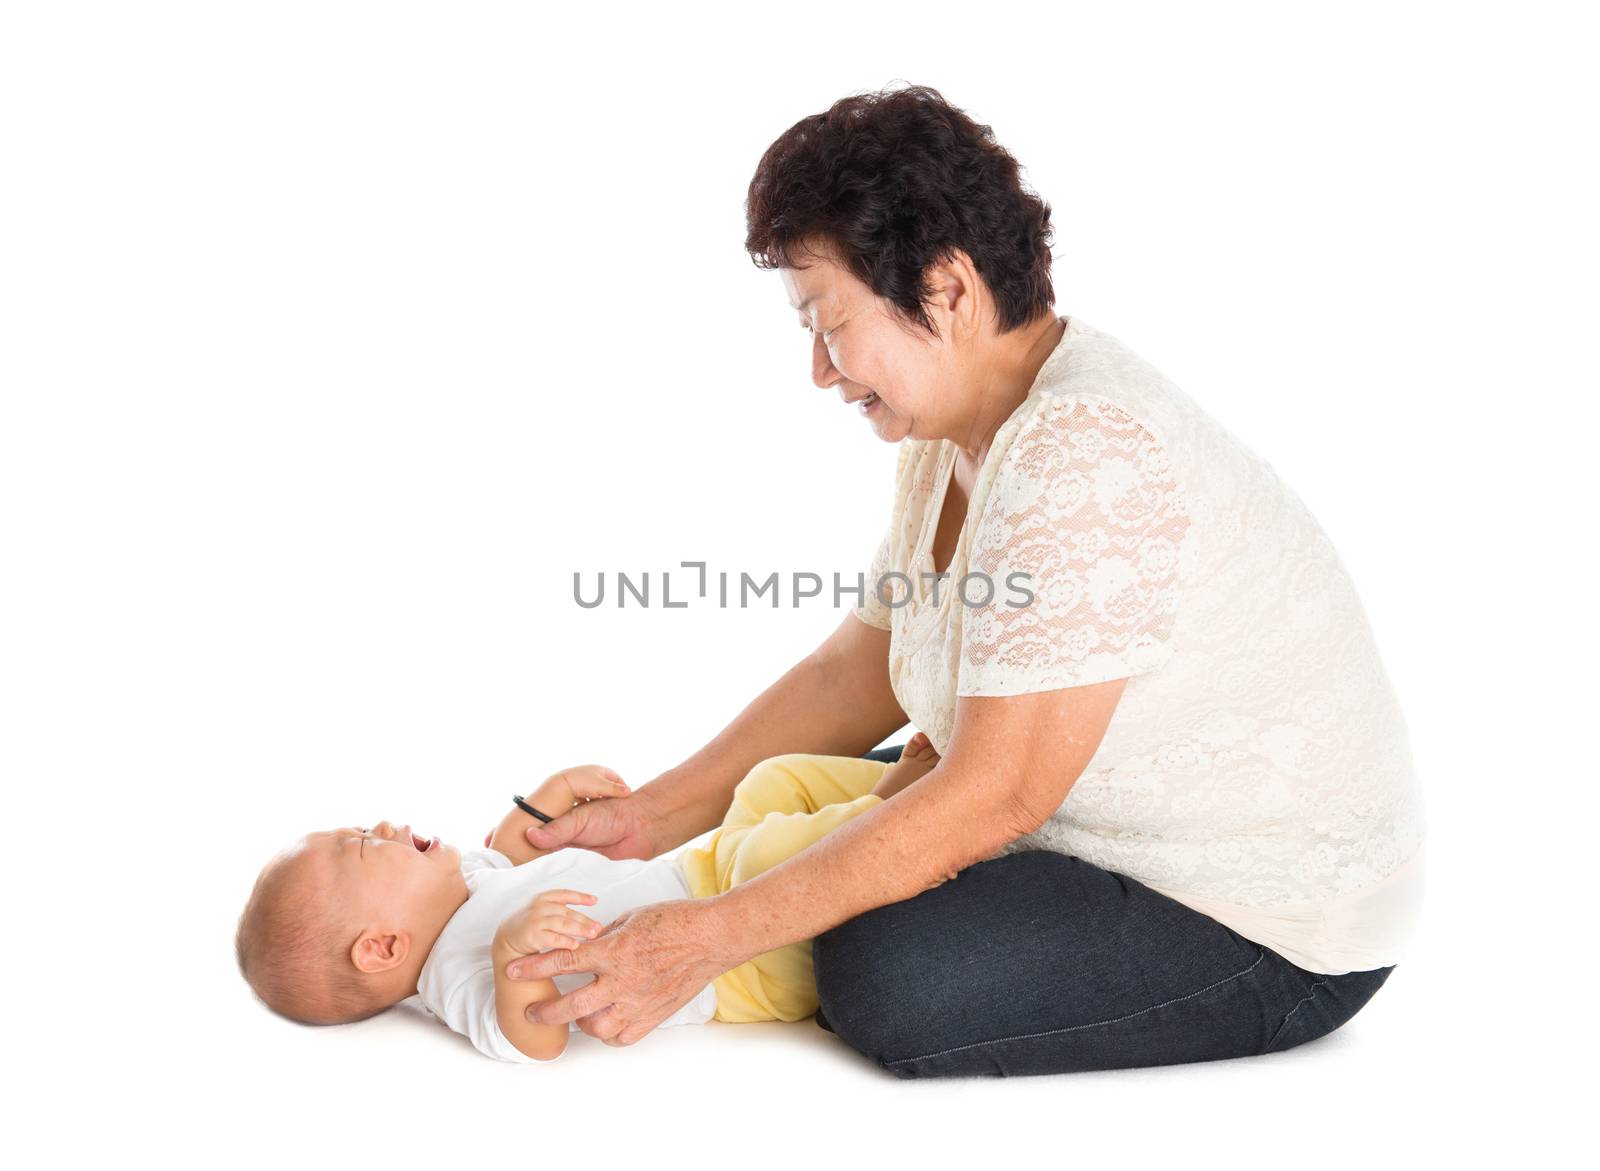 Grandmother comforting crying grandson. Isolated on white background.